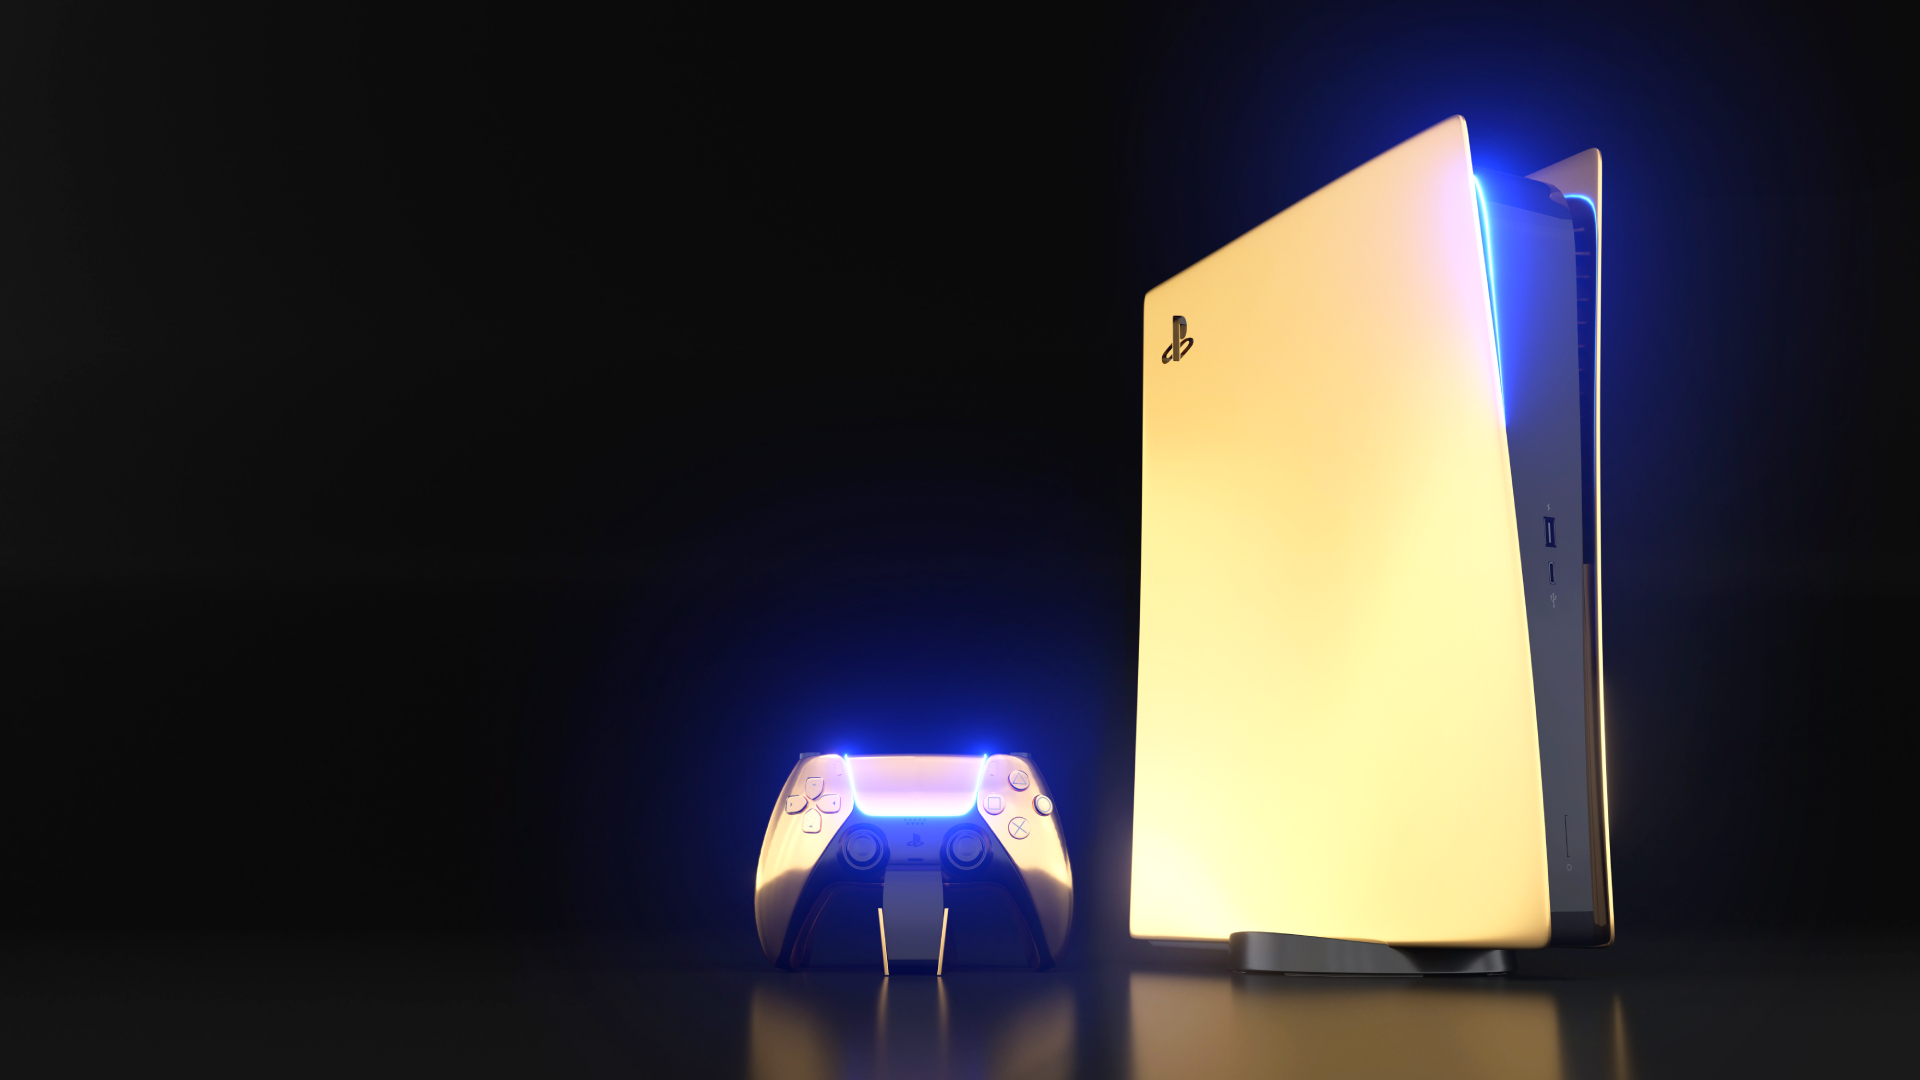 PlayStation 5's new 1440p resolution option does not support VRR